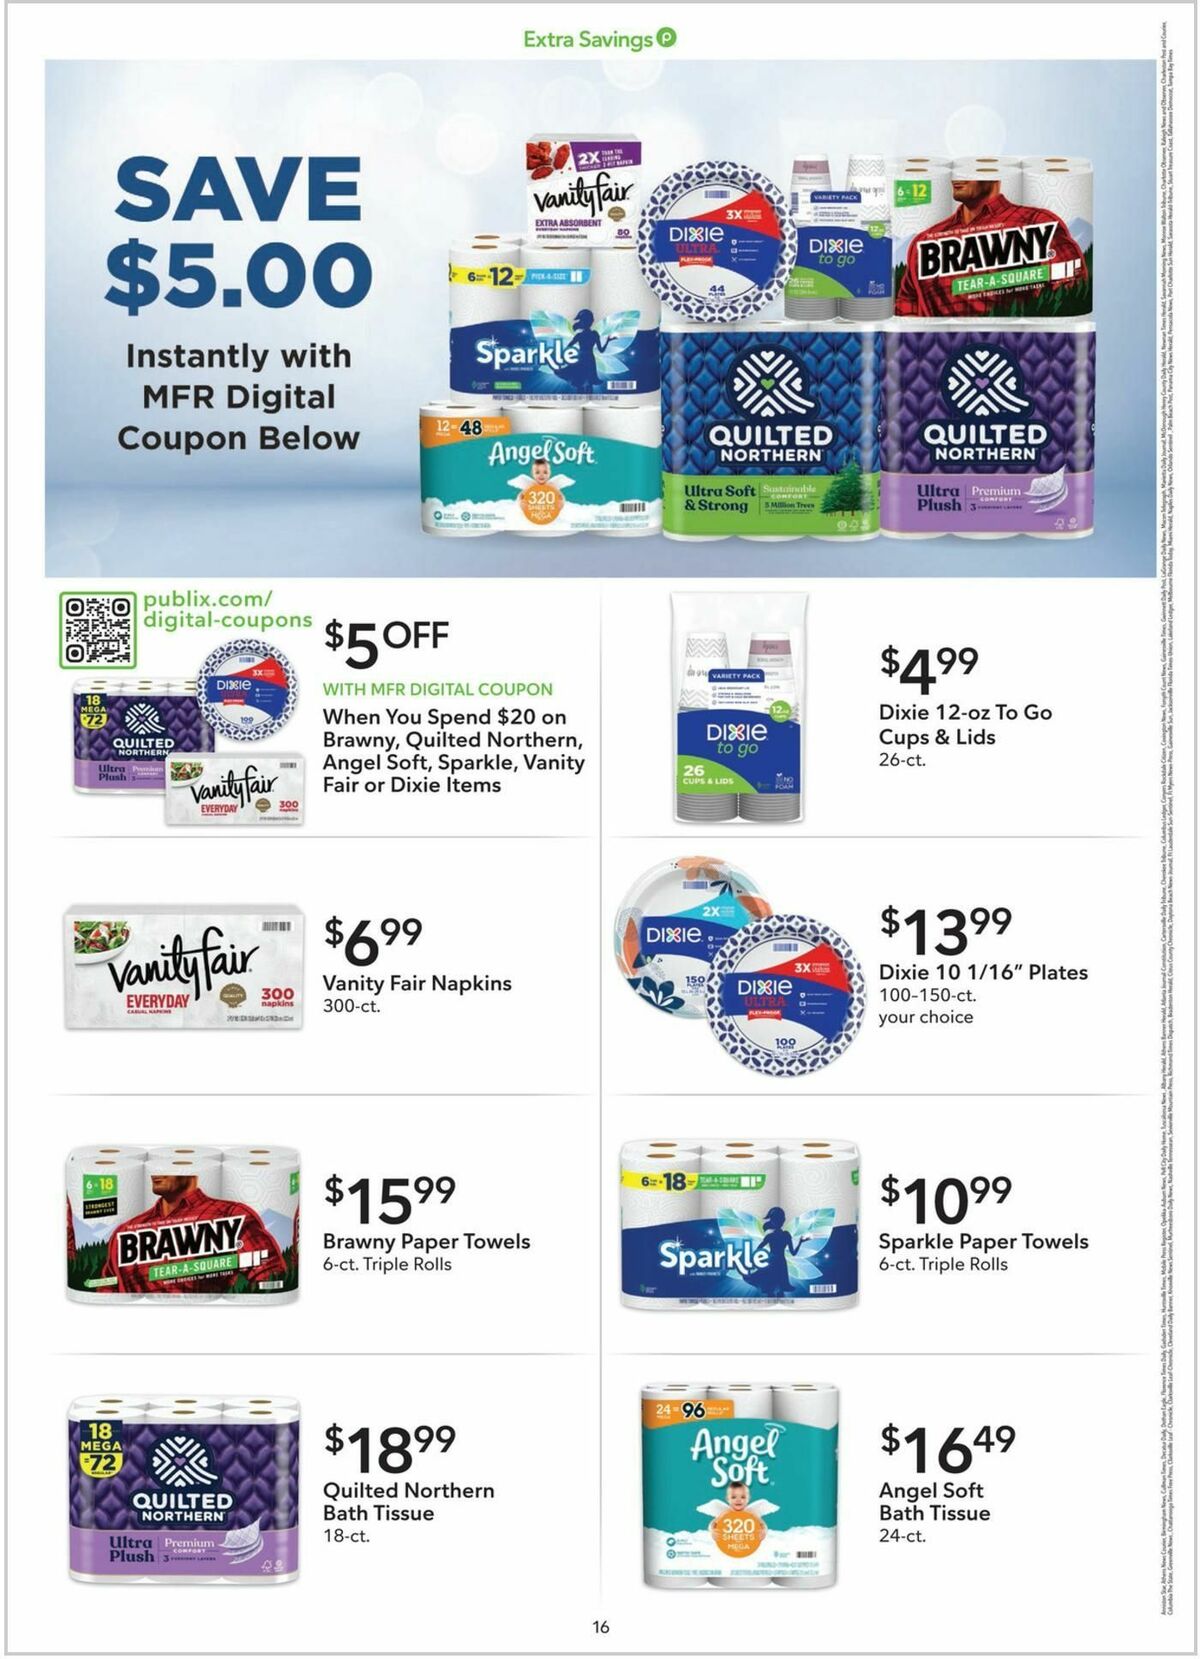 Publix Extra Savings Weekly Ad from December 16